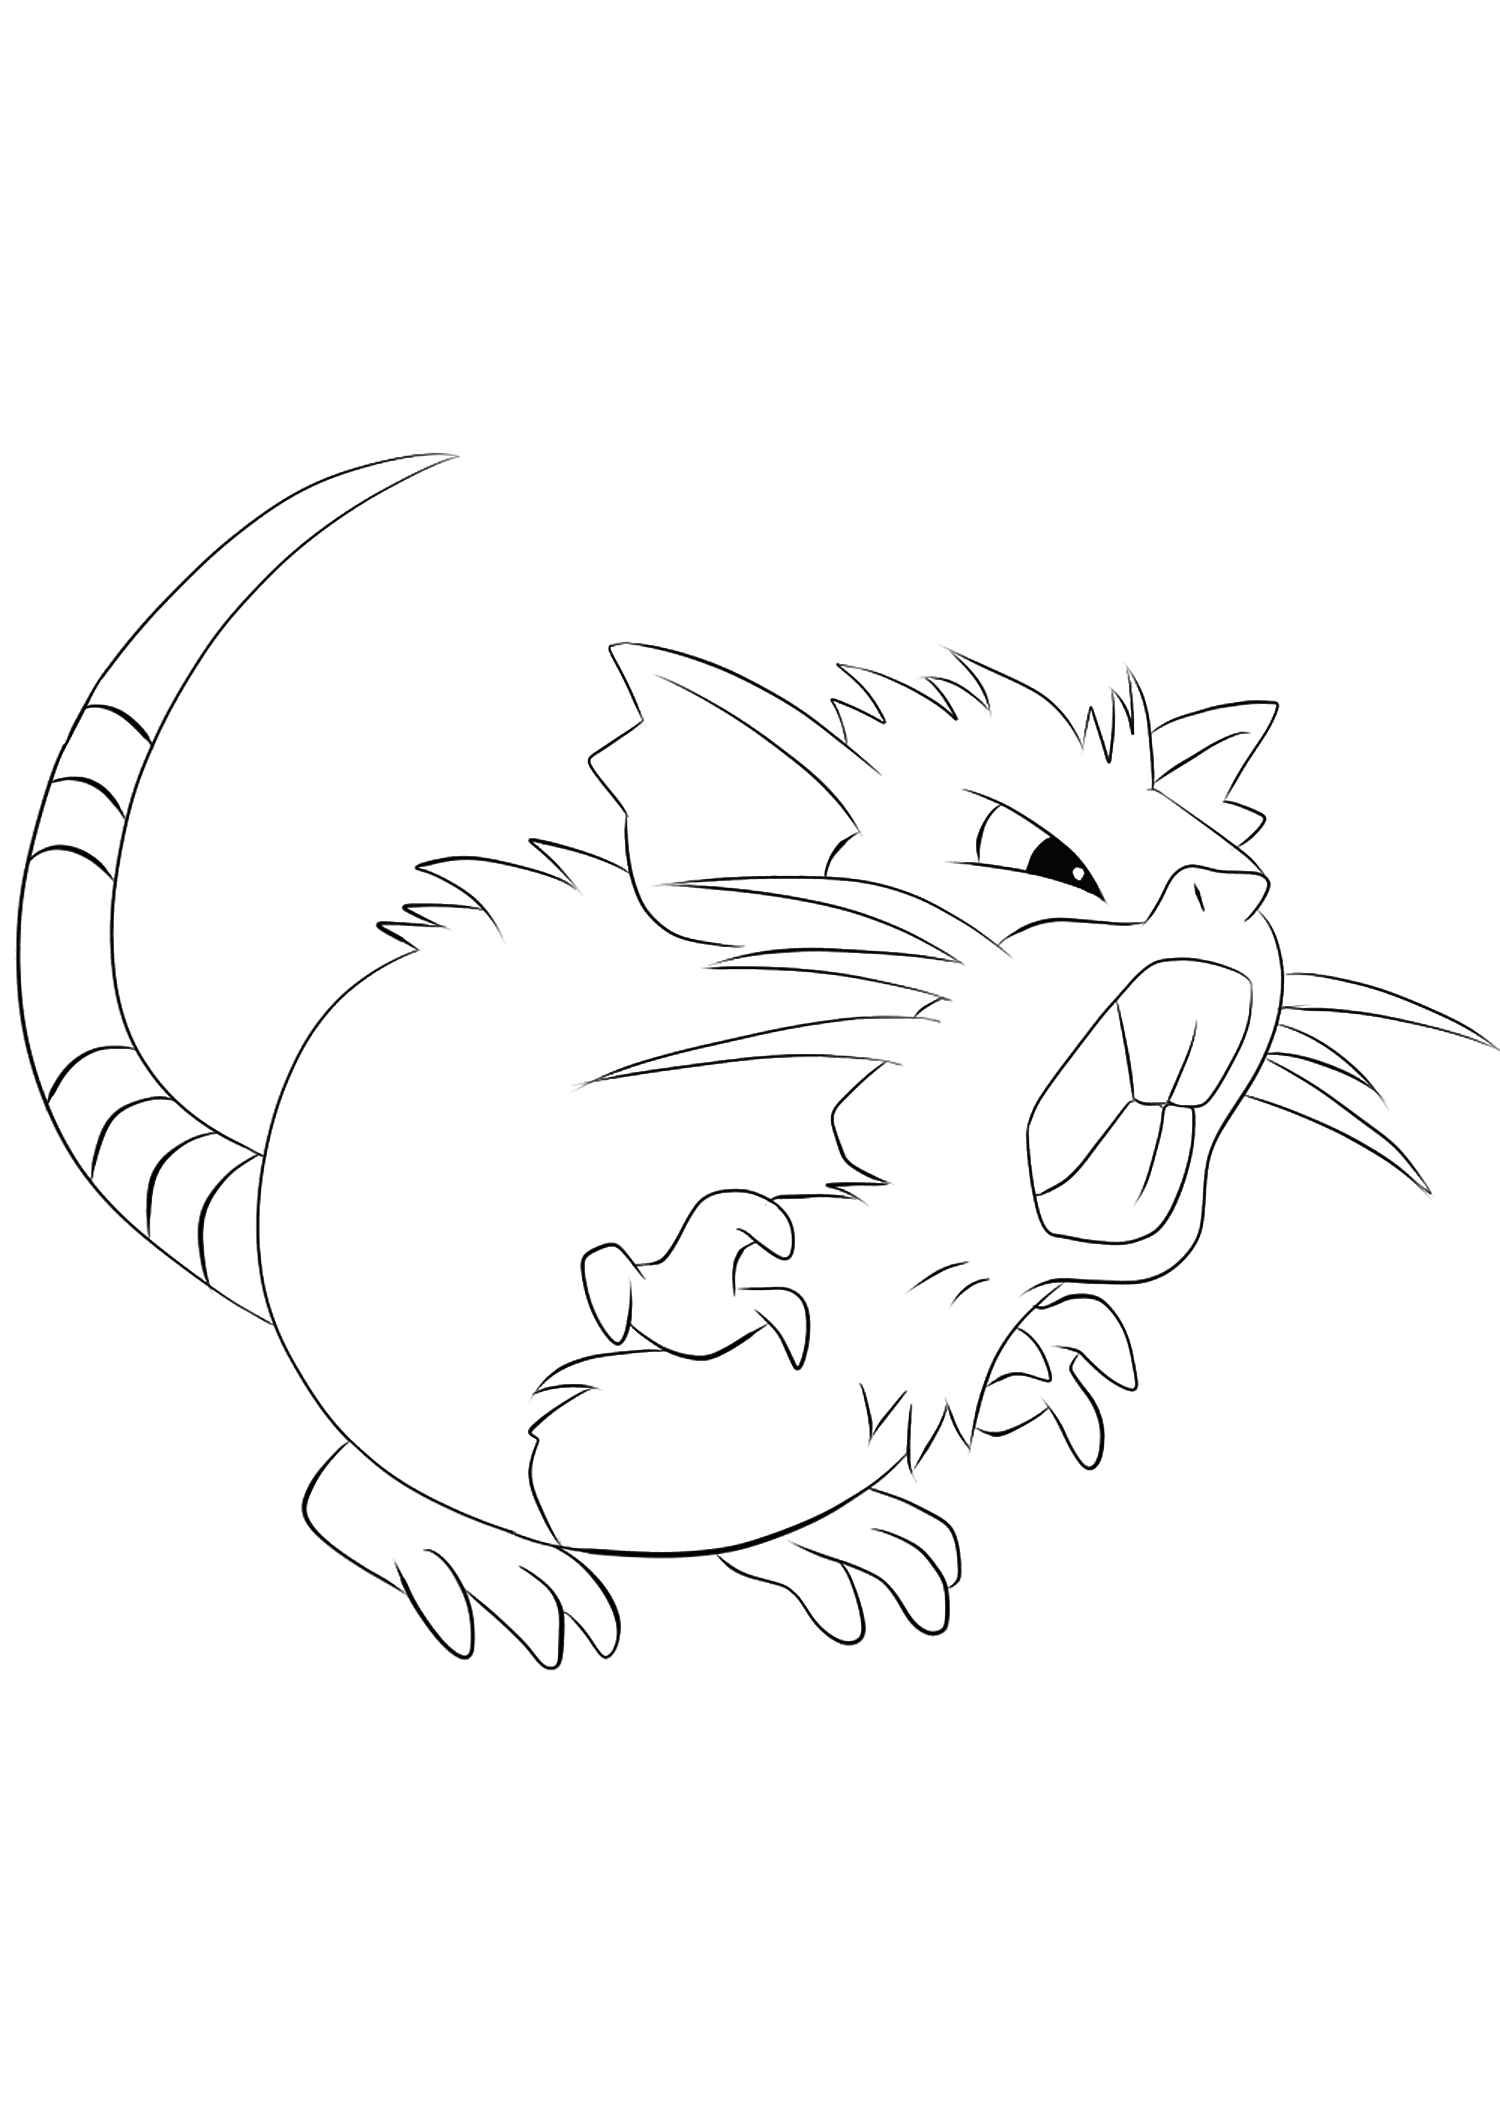 Raticate No.20 : Pokemon Generation I - All Pokemon coloring pages Kids